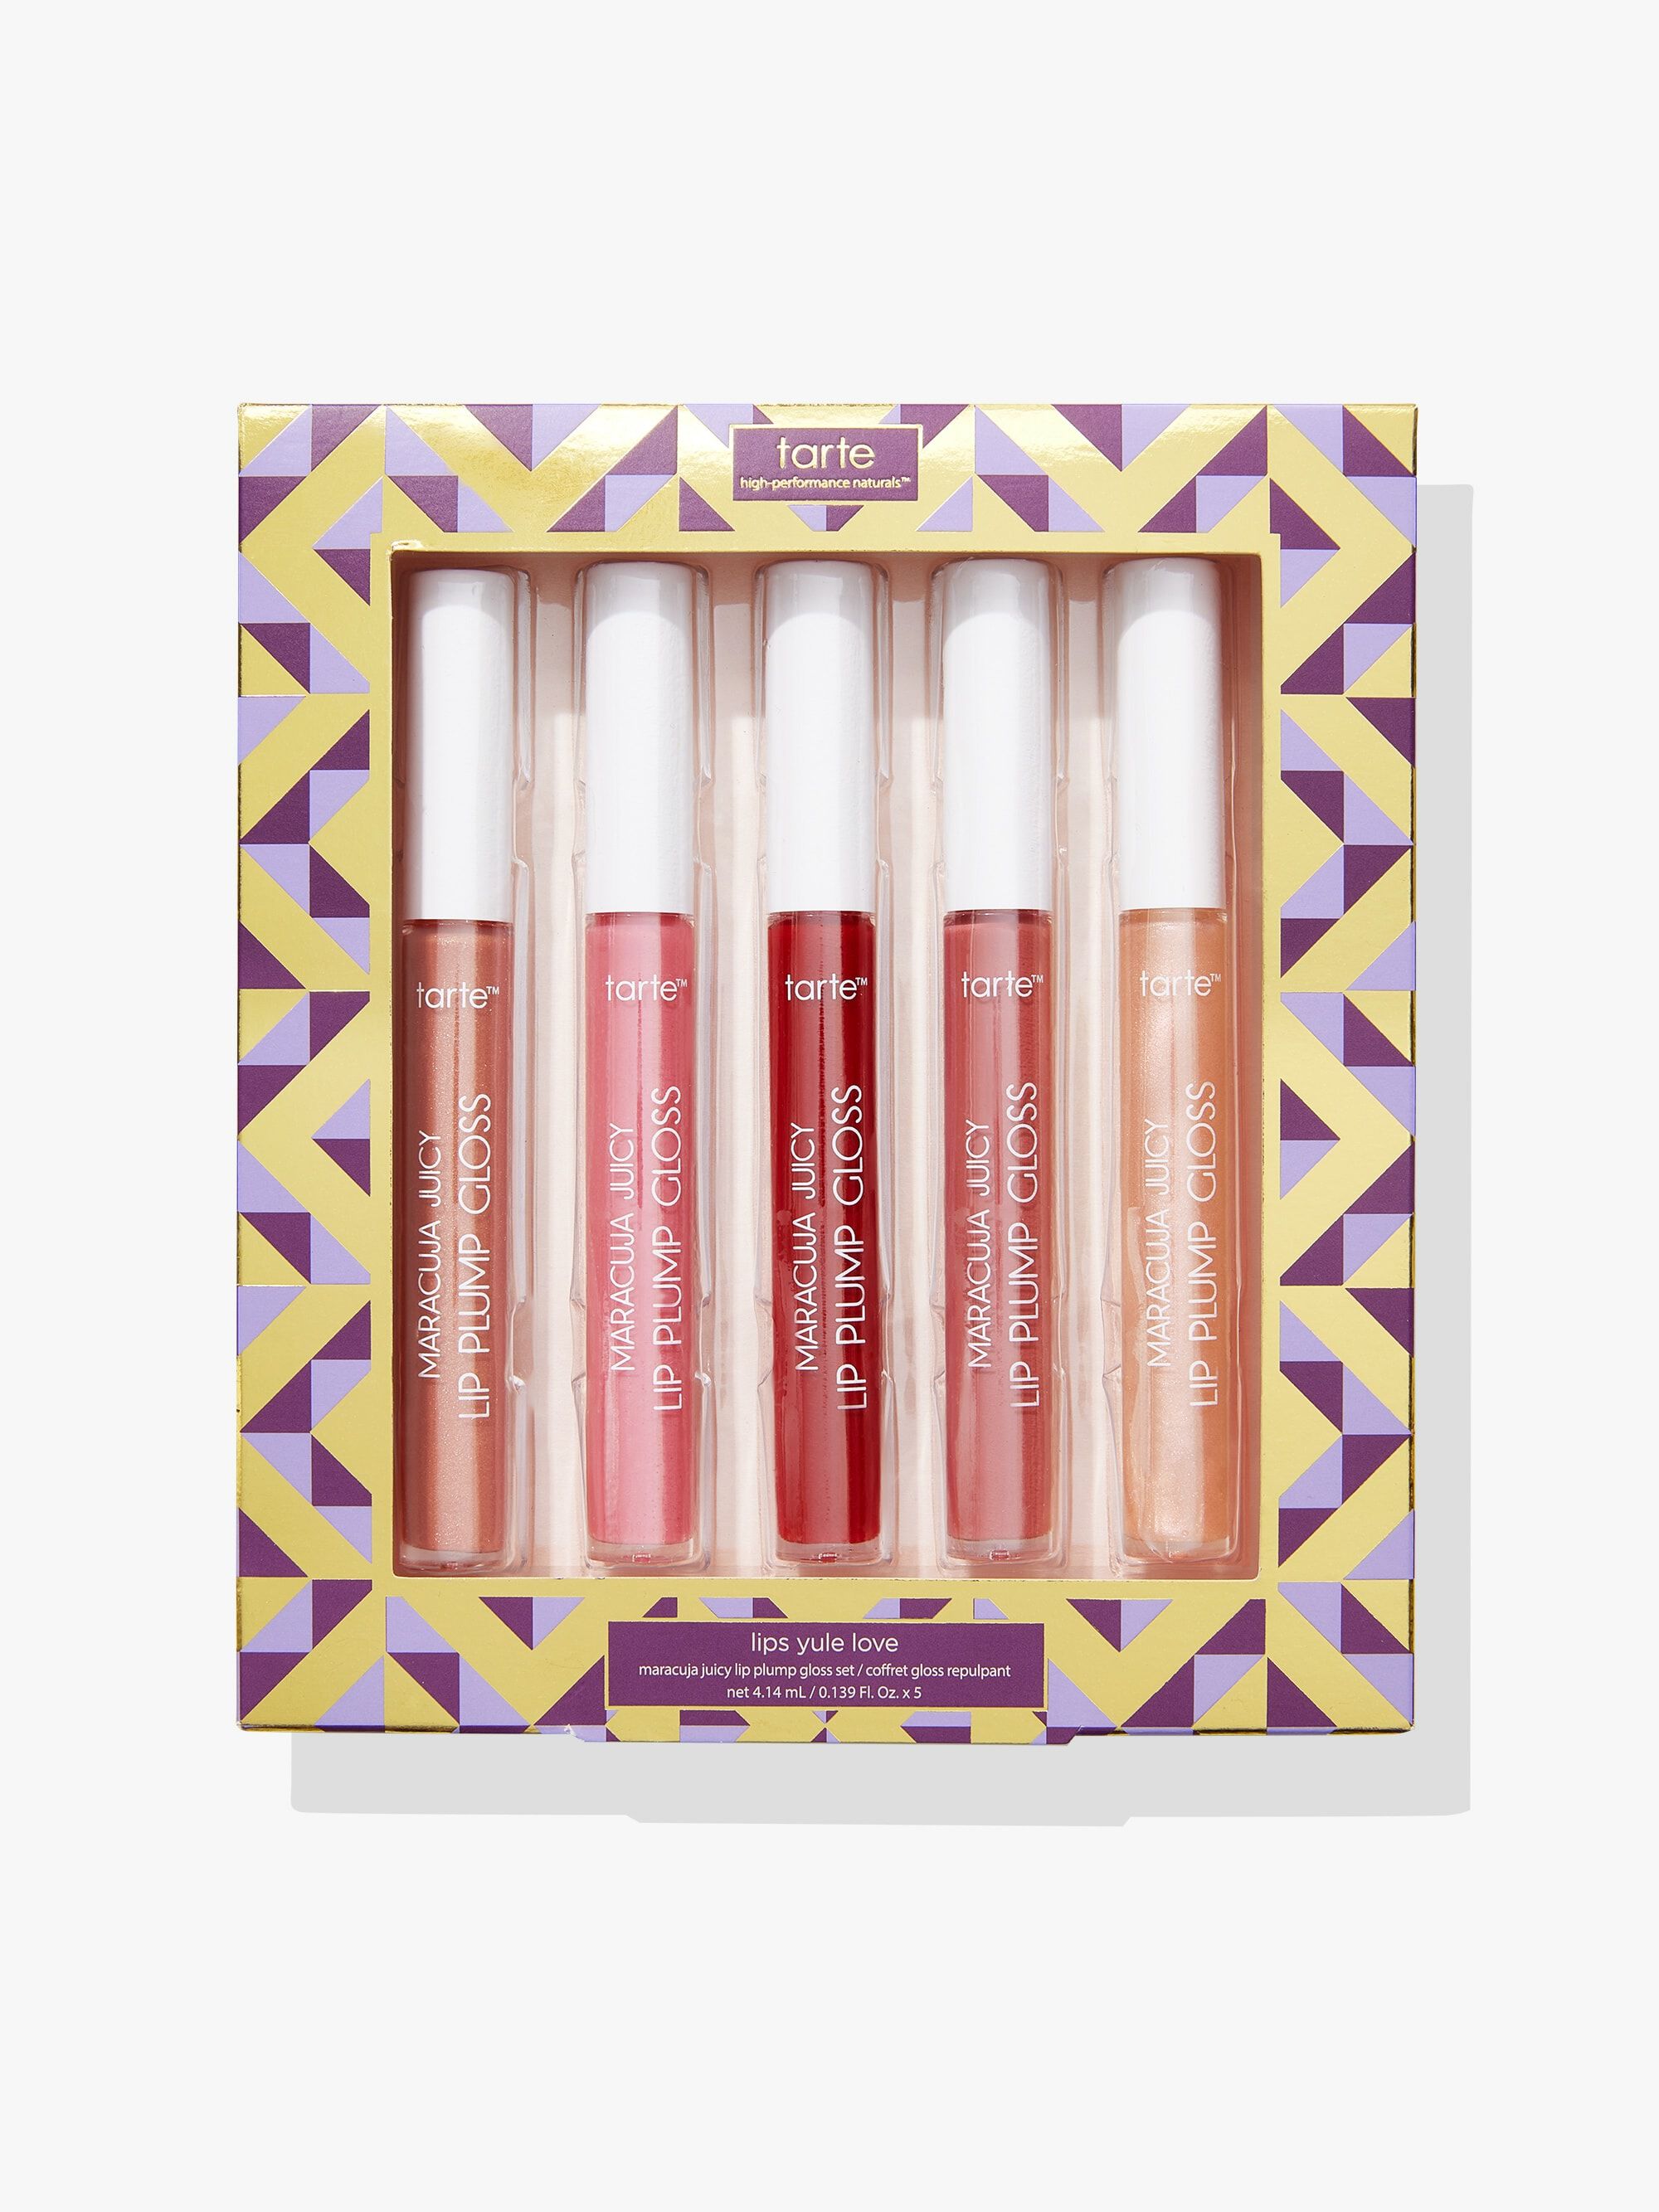 Peachy Scented Lip Gloss Set - 4 Pack